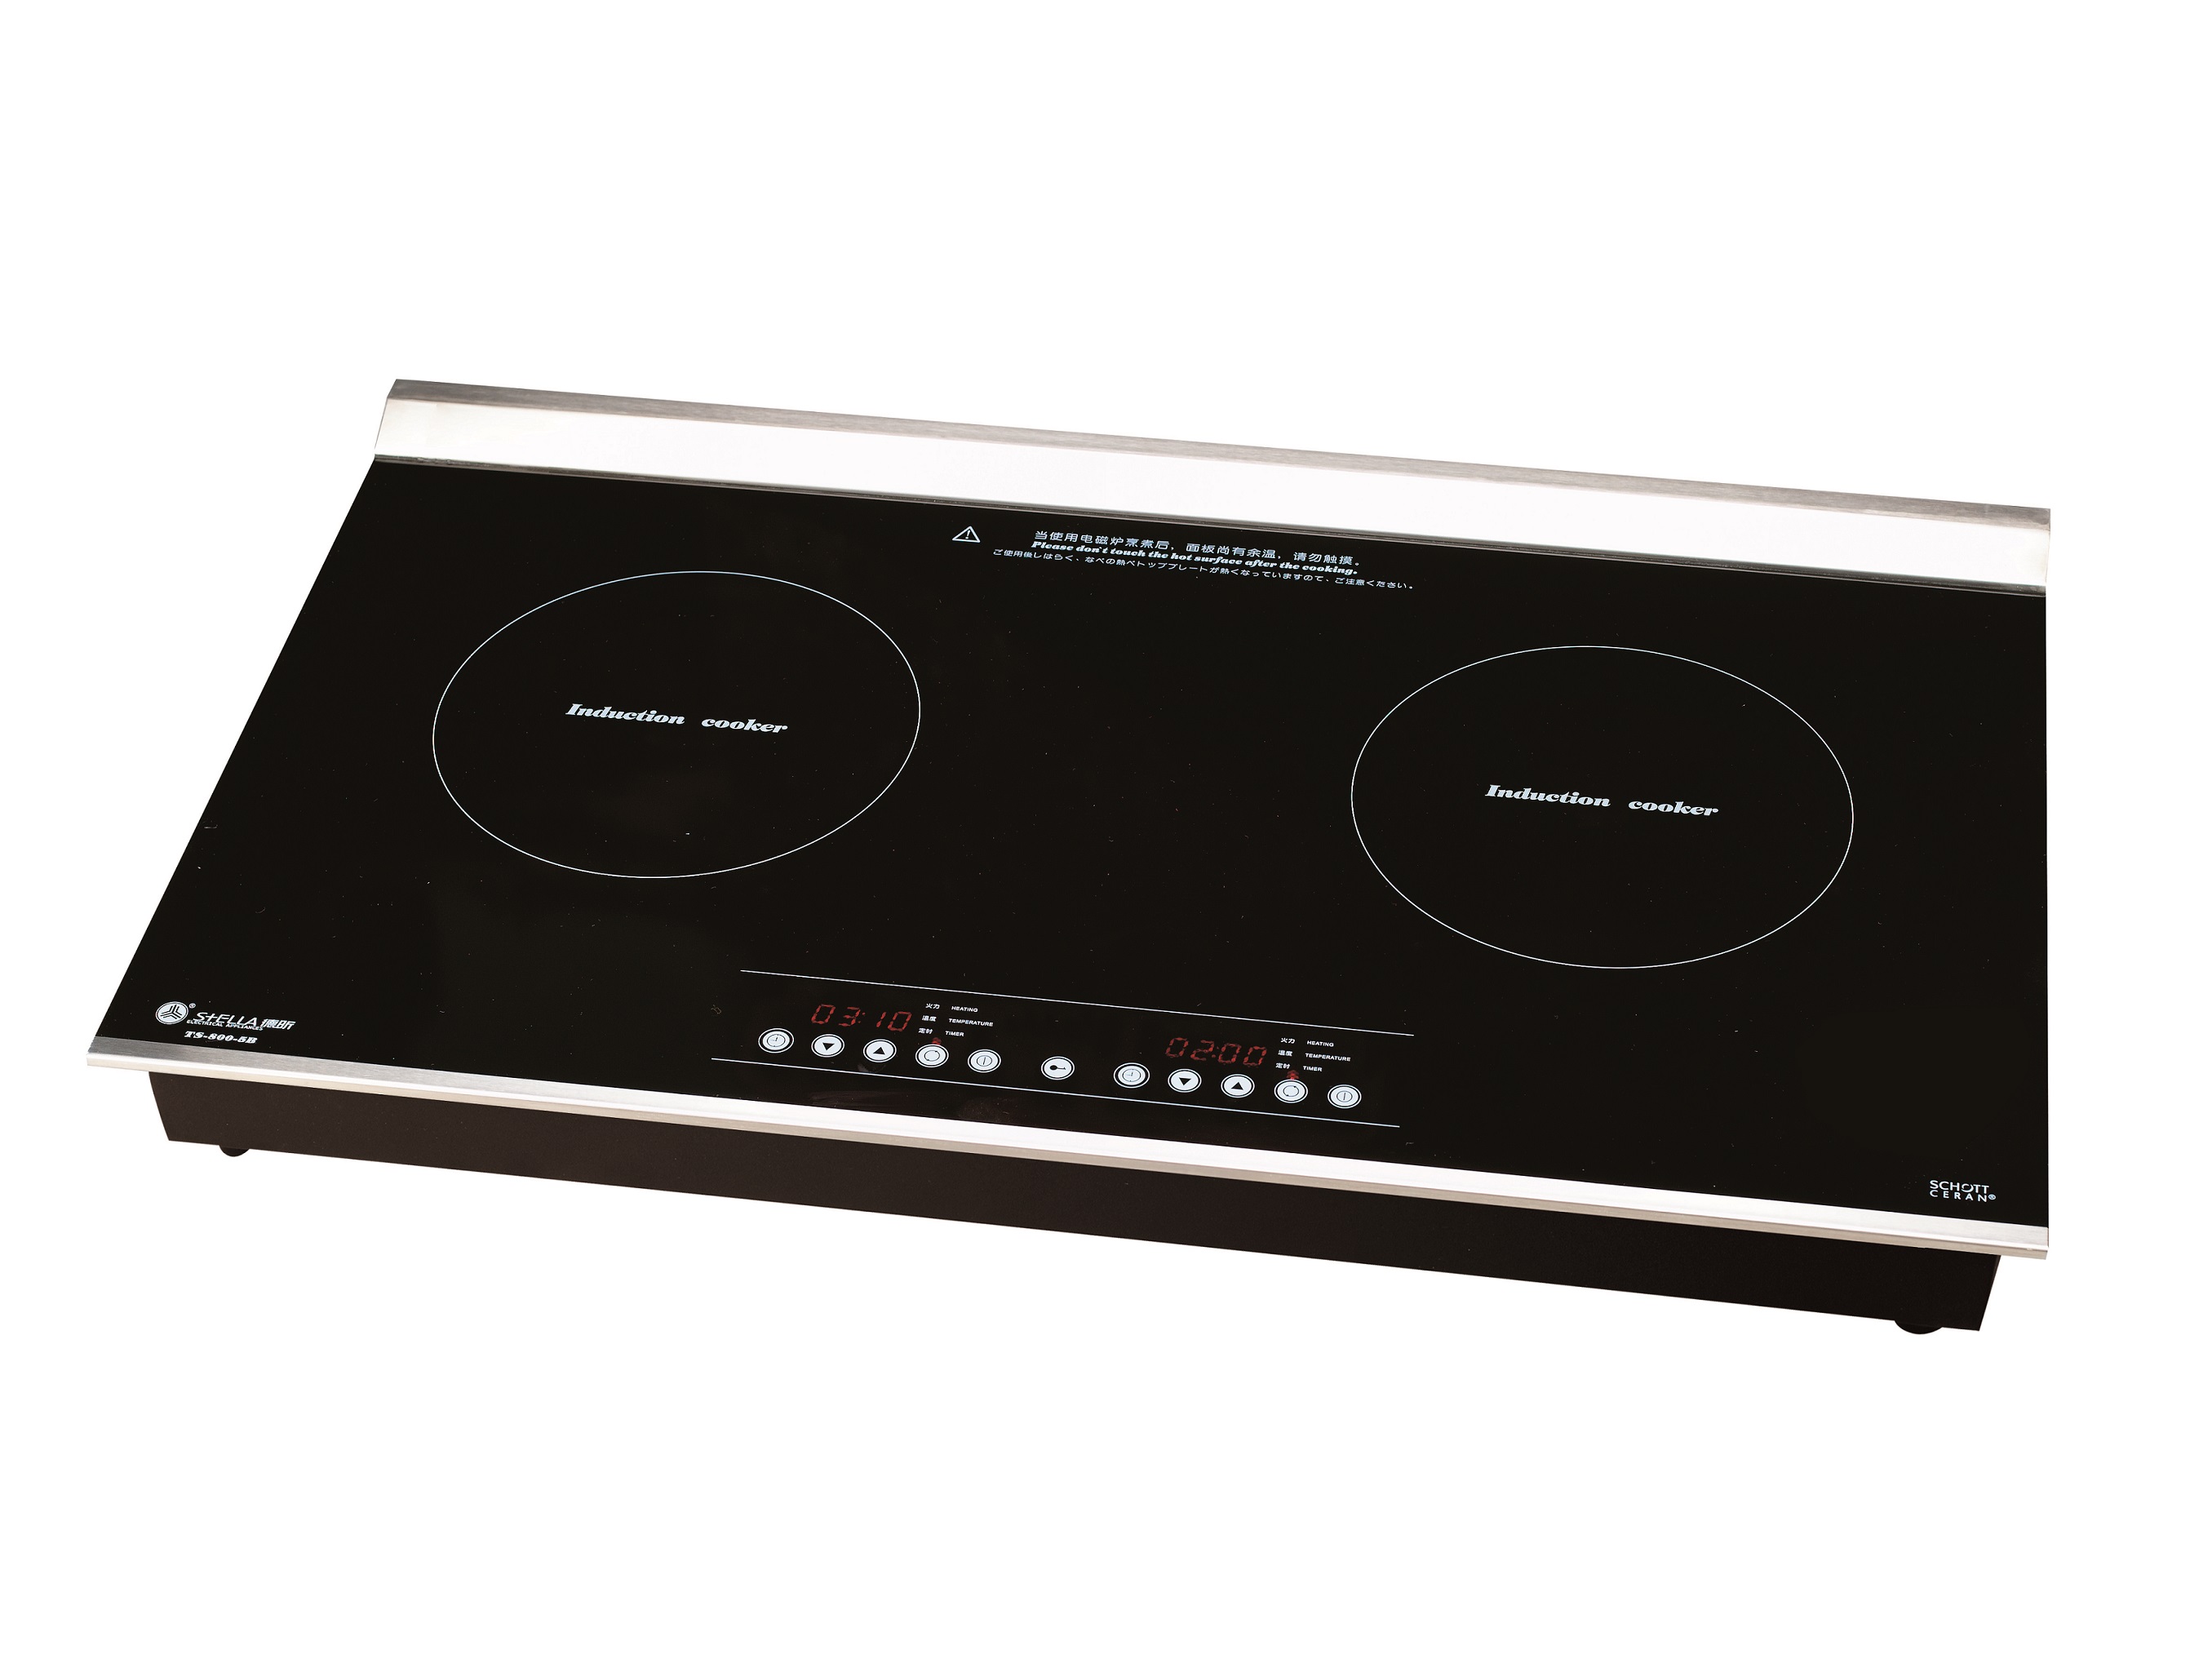 Induction Cooker - Igbt Made In Siemens,Induction Cooker (Bottom Exhaust) - ,3400w,Digital Frequency Conversional Micro-Co. System,Built In Adn Free-Standing Induction Cooker